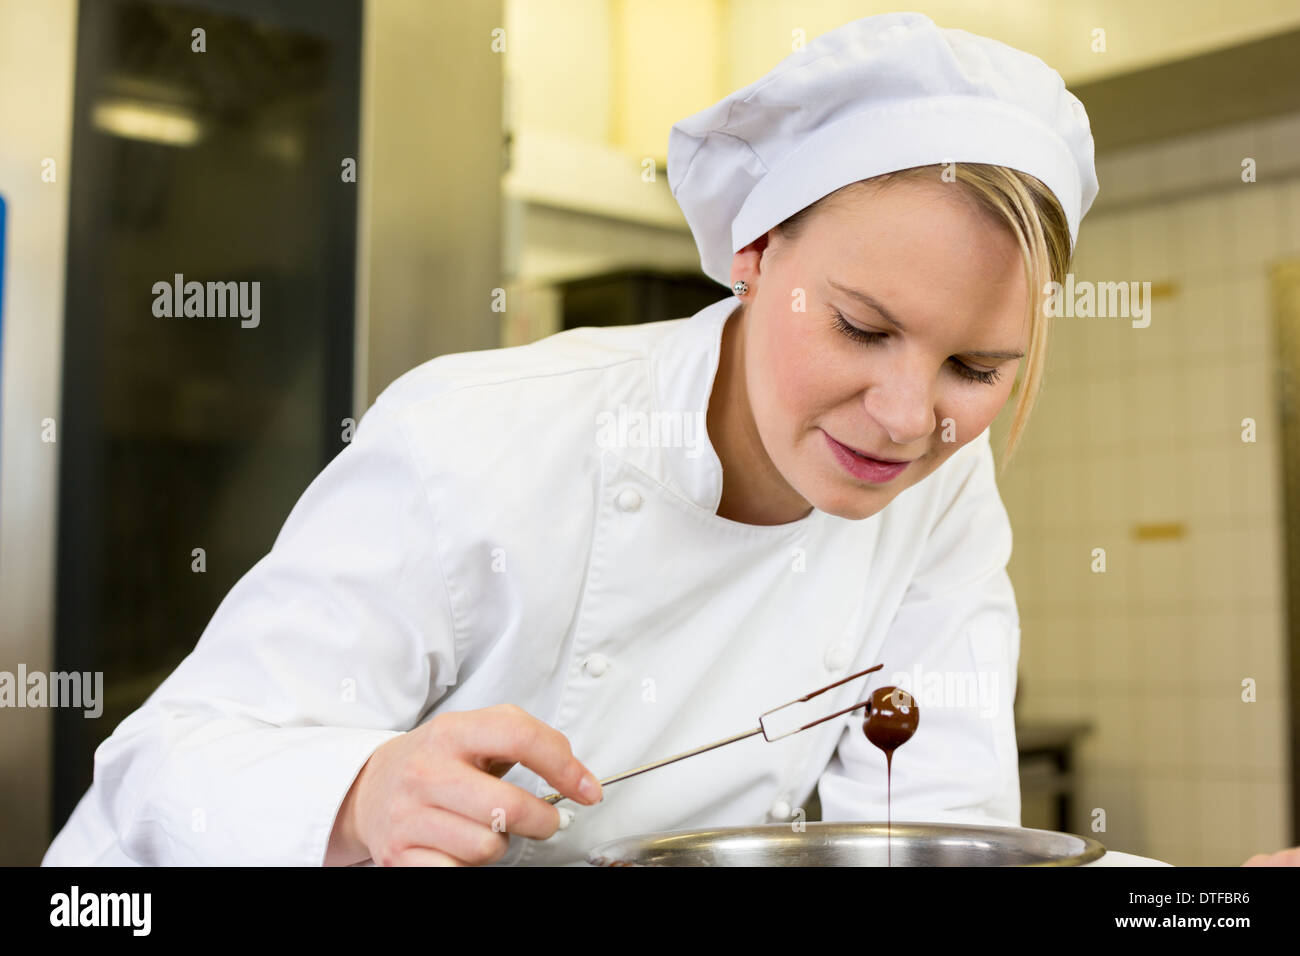 confectioner producing filled chocolates in confectionery Stock Photo